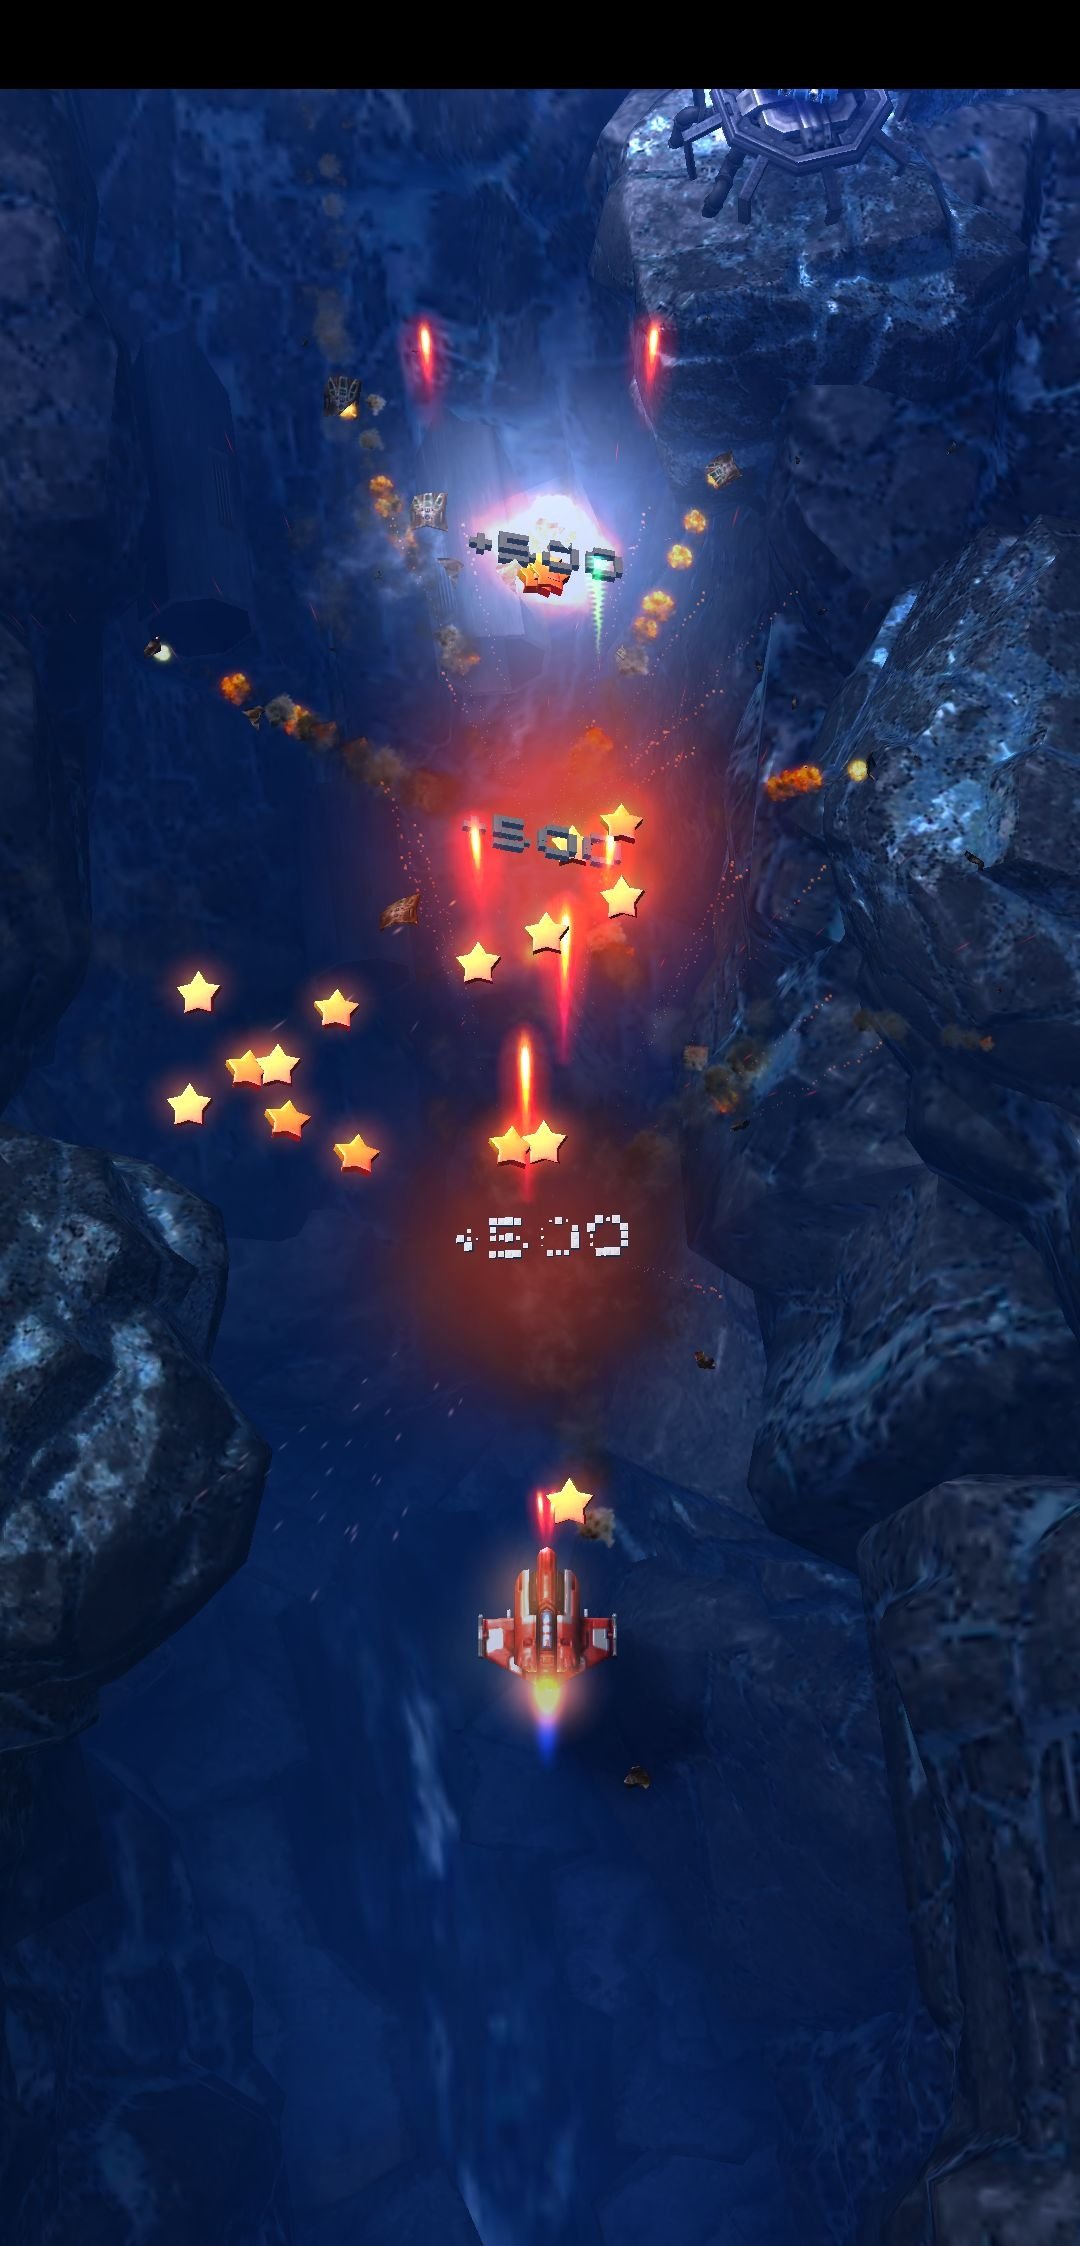 sky force reloaded tips xbox one